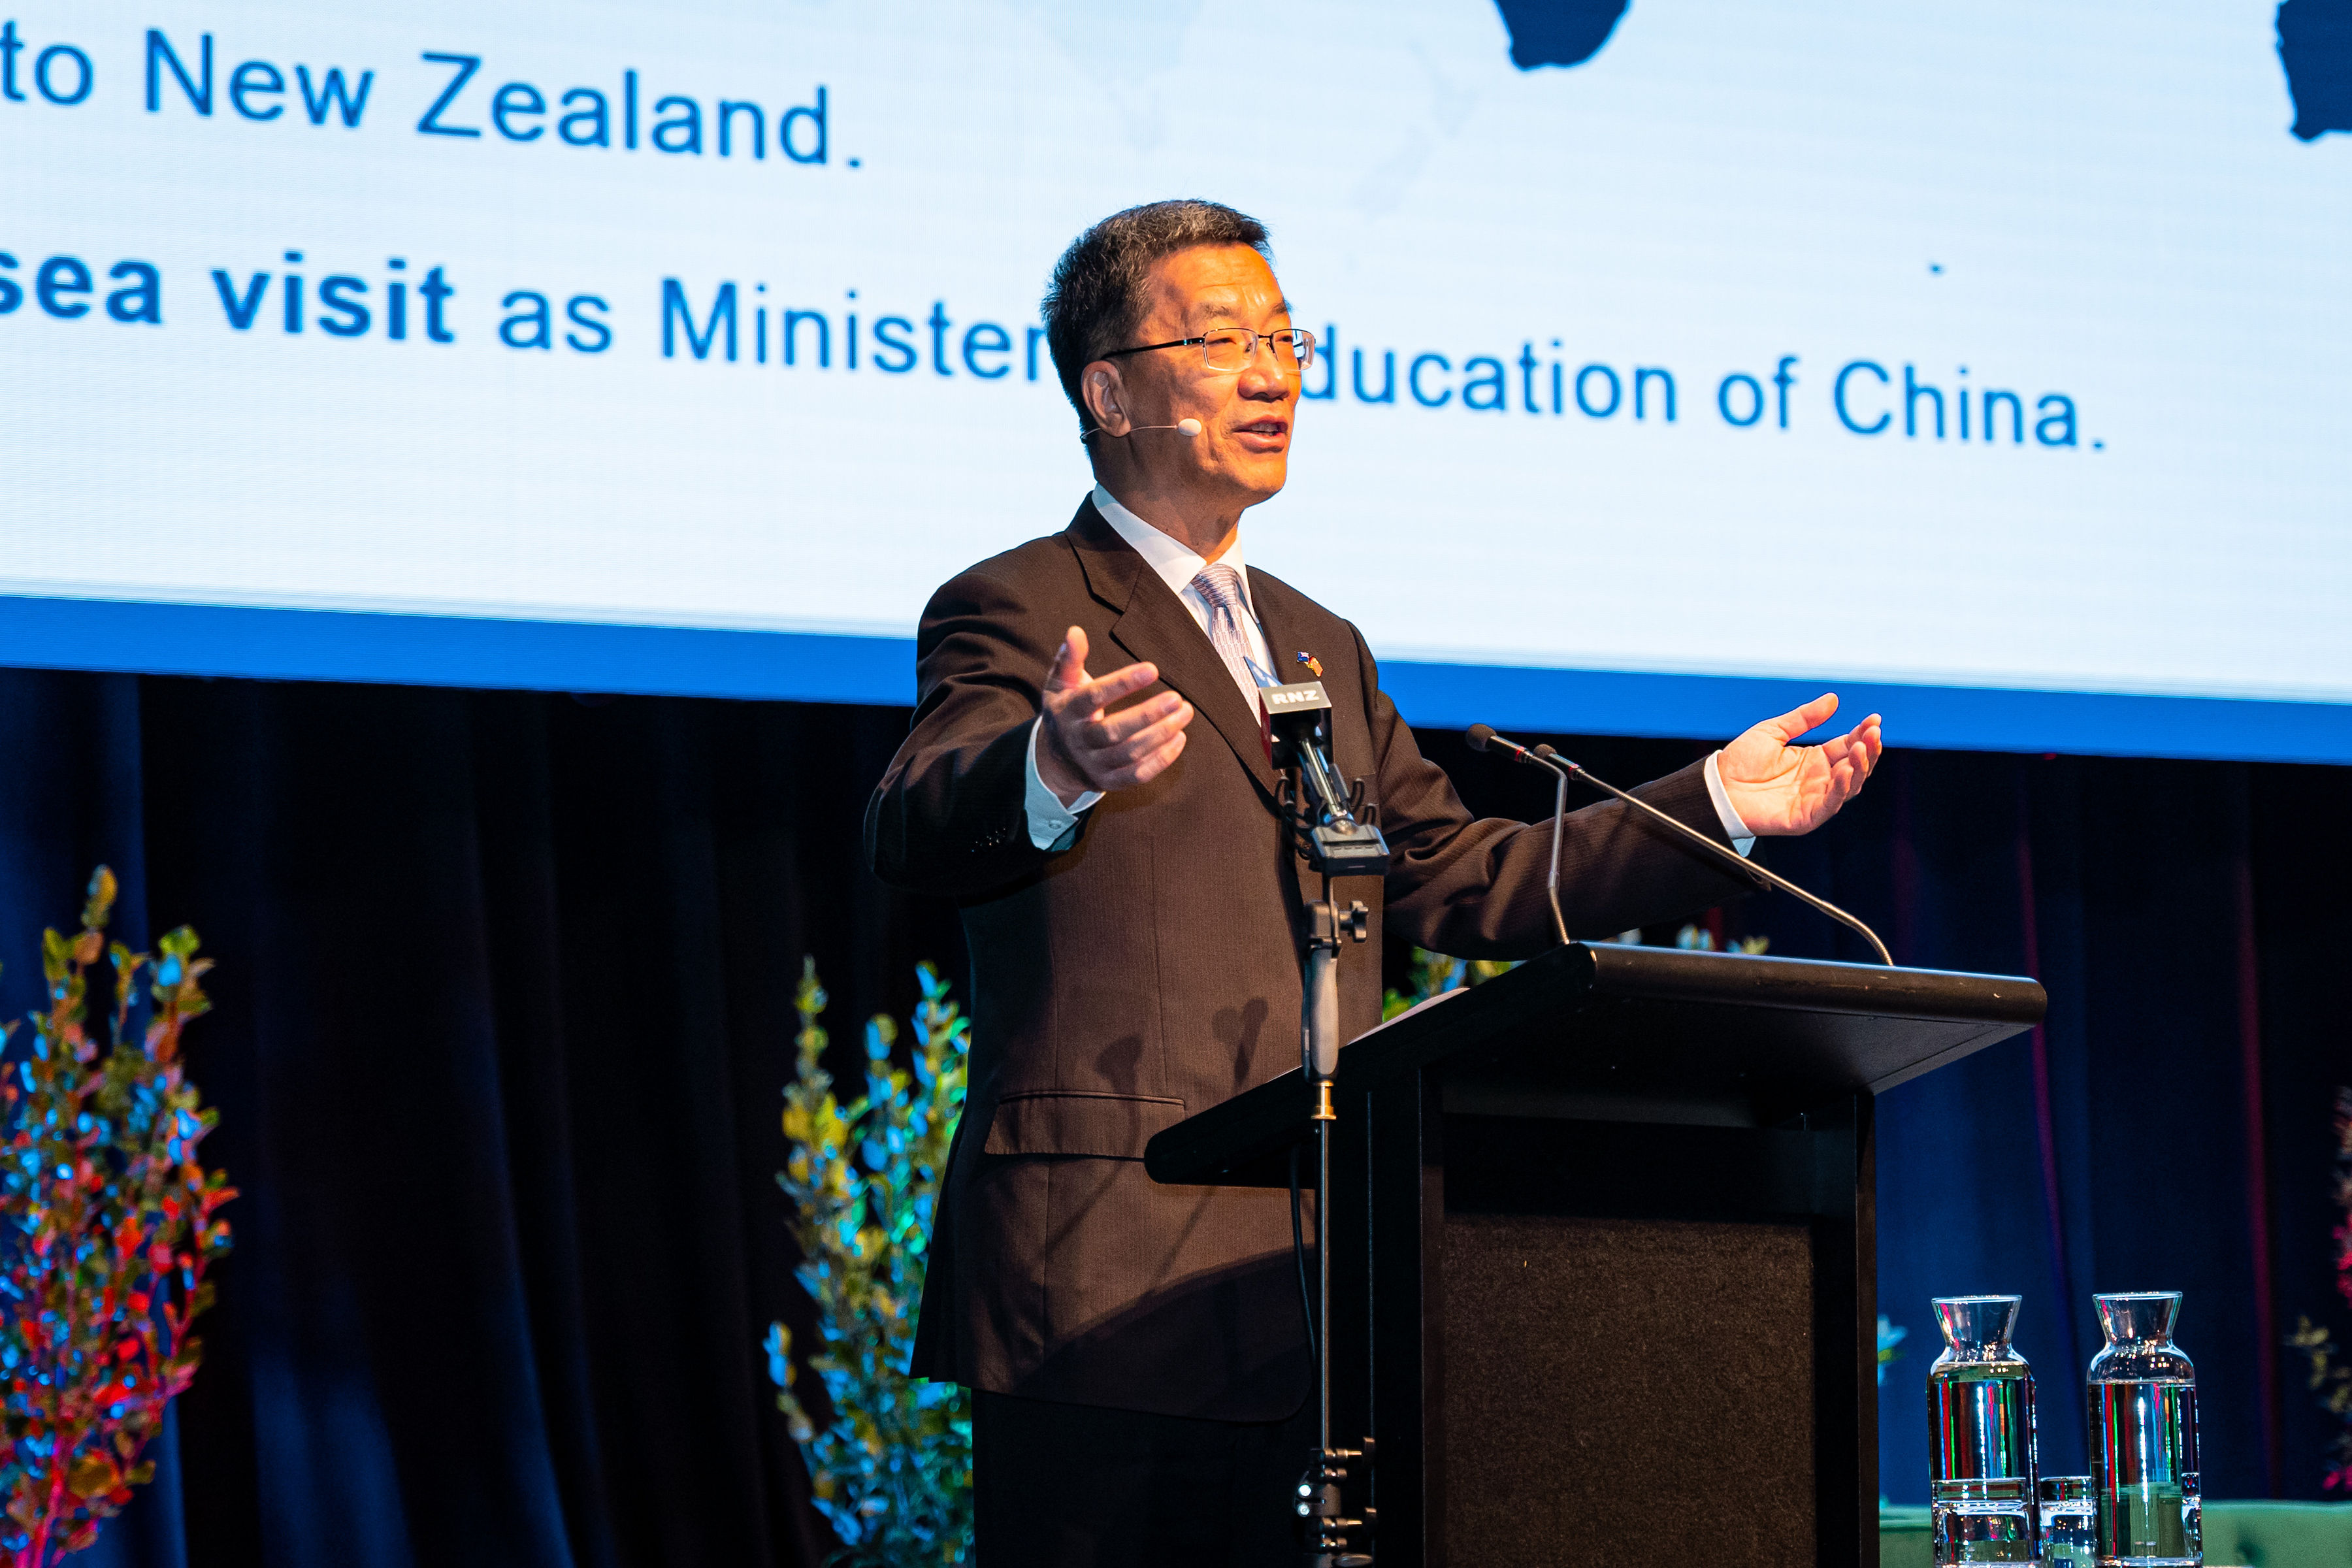 Chinas Minister for Education His Excellency Huai Jinpeng delivers the Country of Honour keynote address at conference